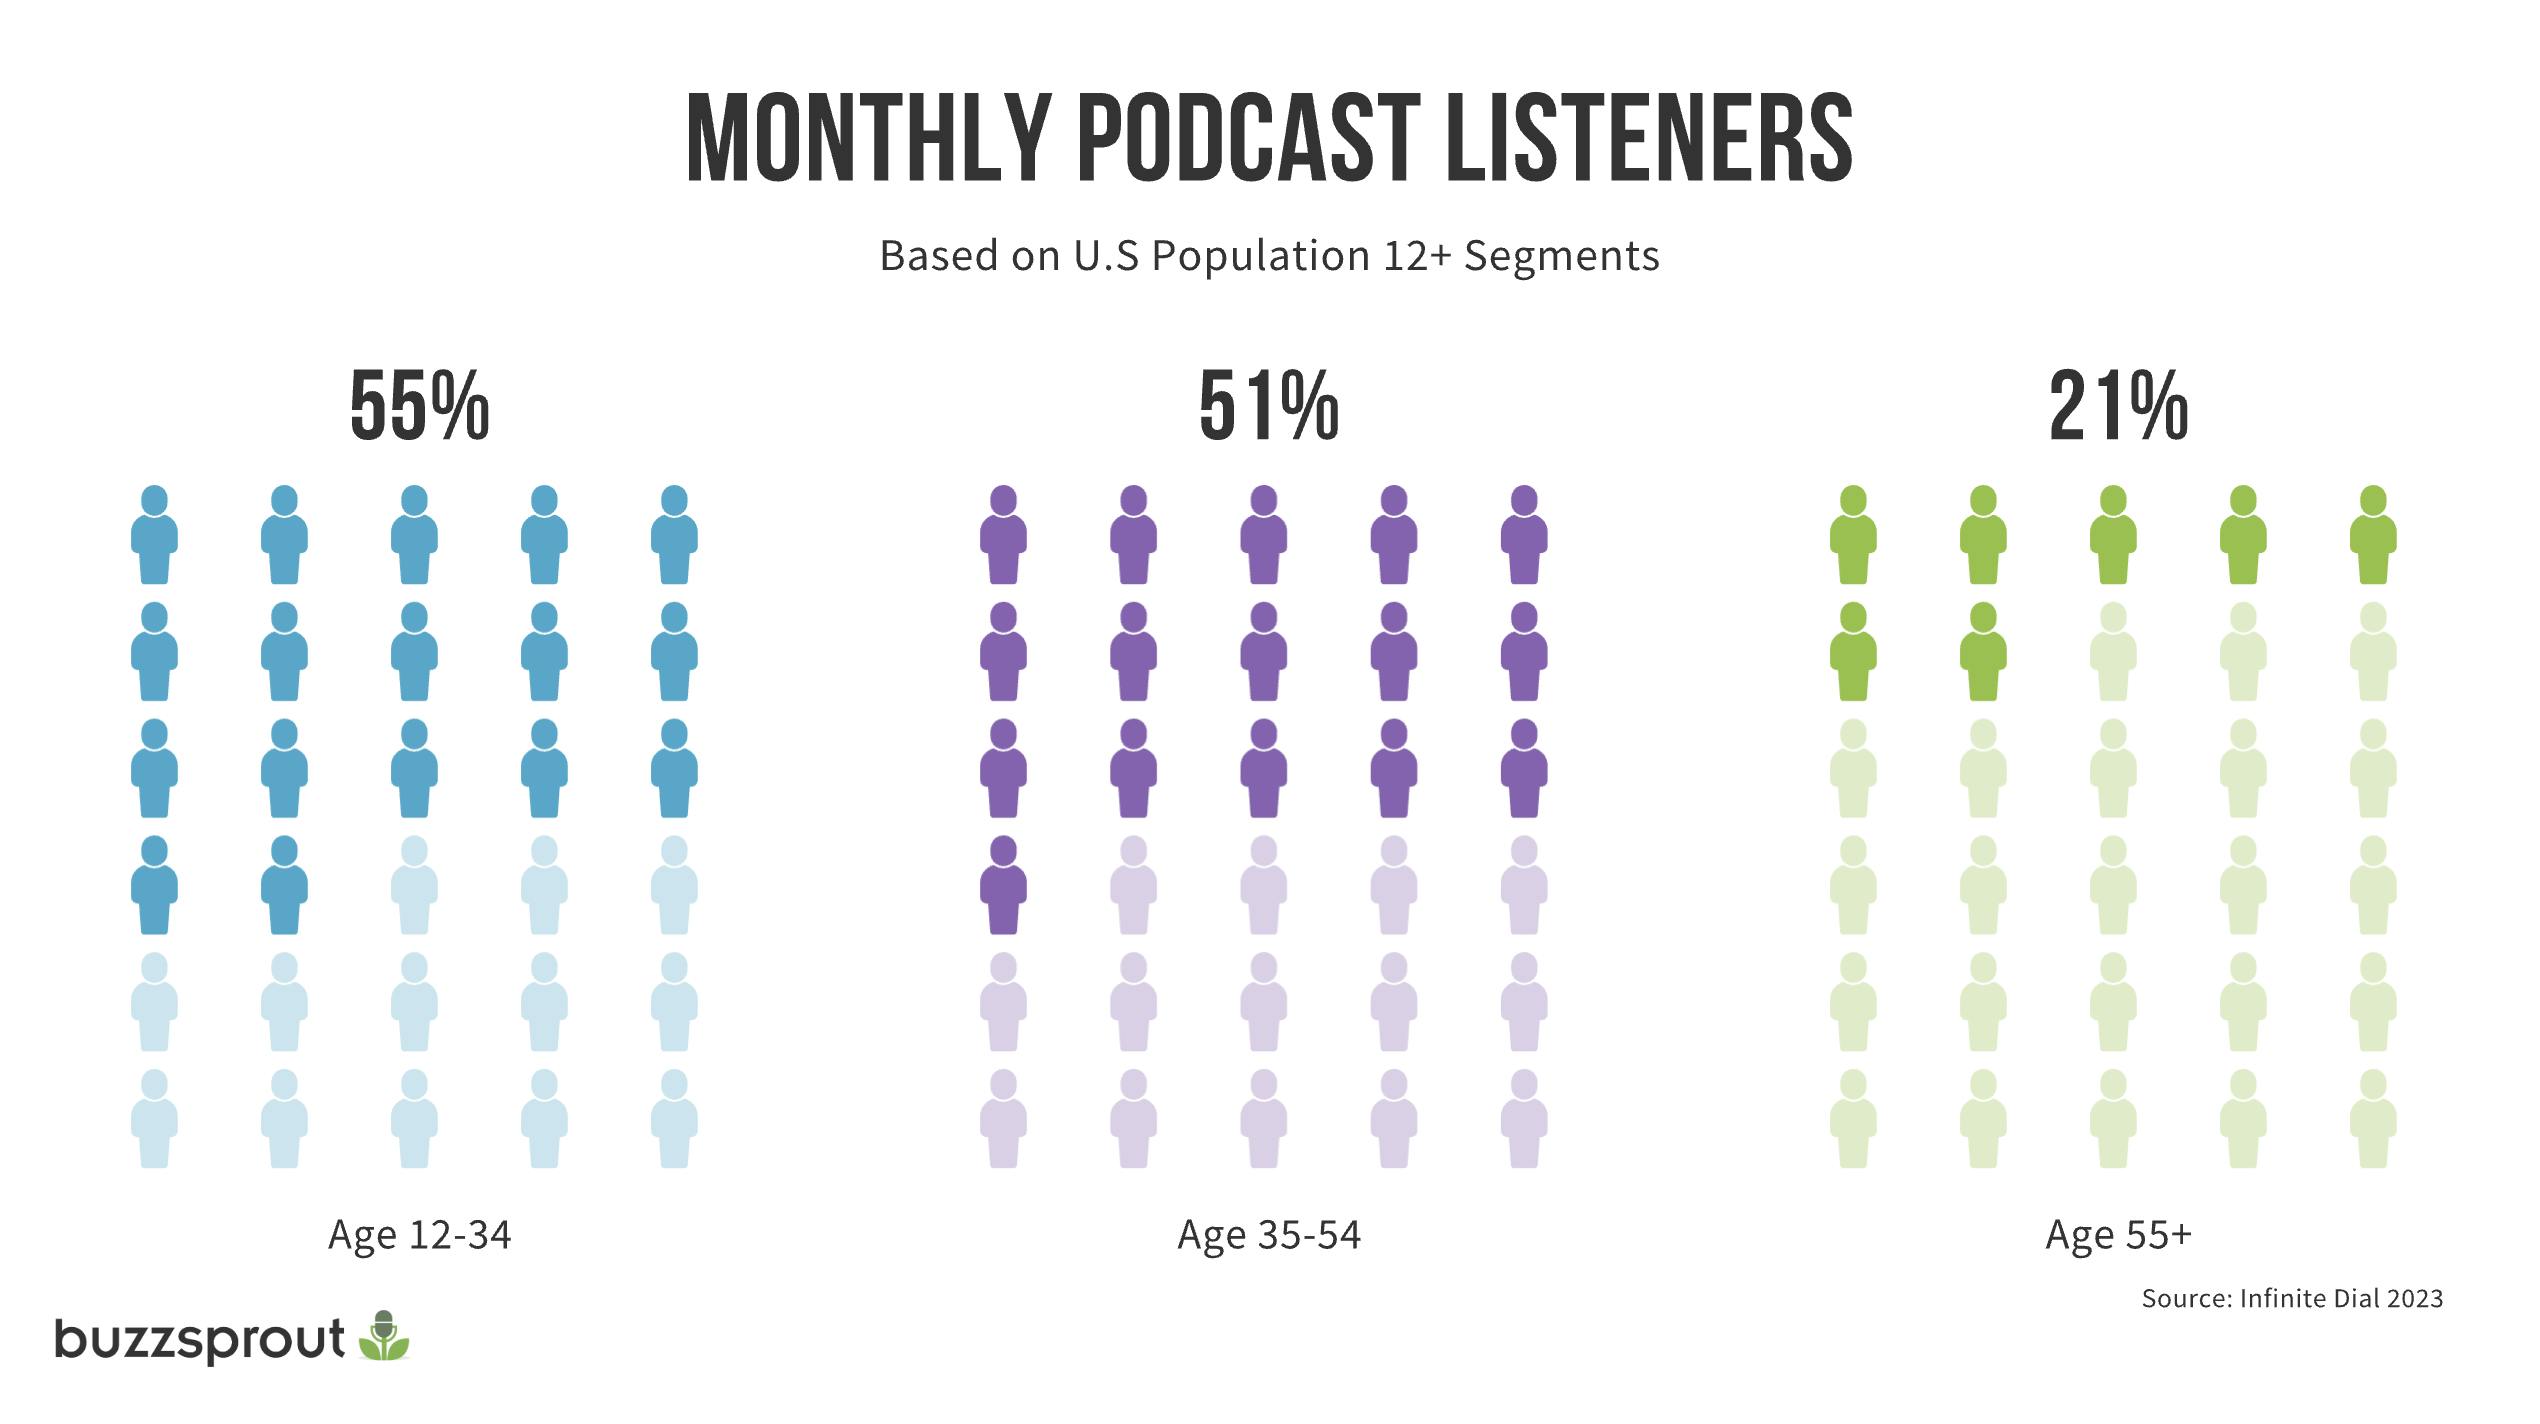 Find Your Next Listen With New Top Podcasts and Trending Podcast